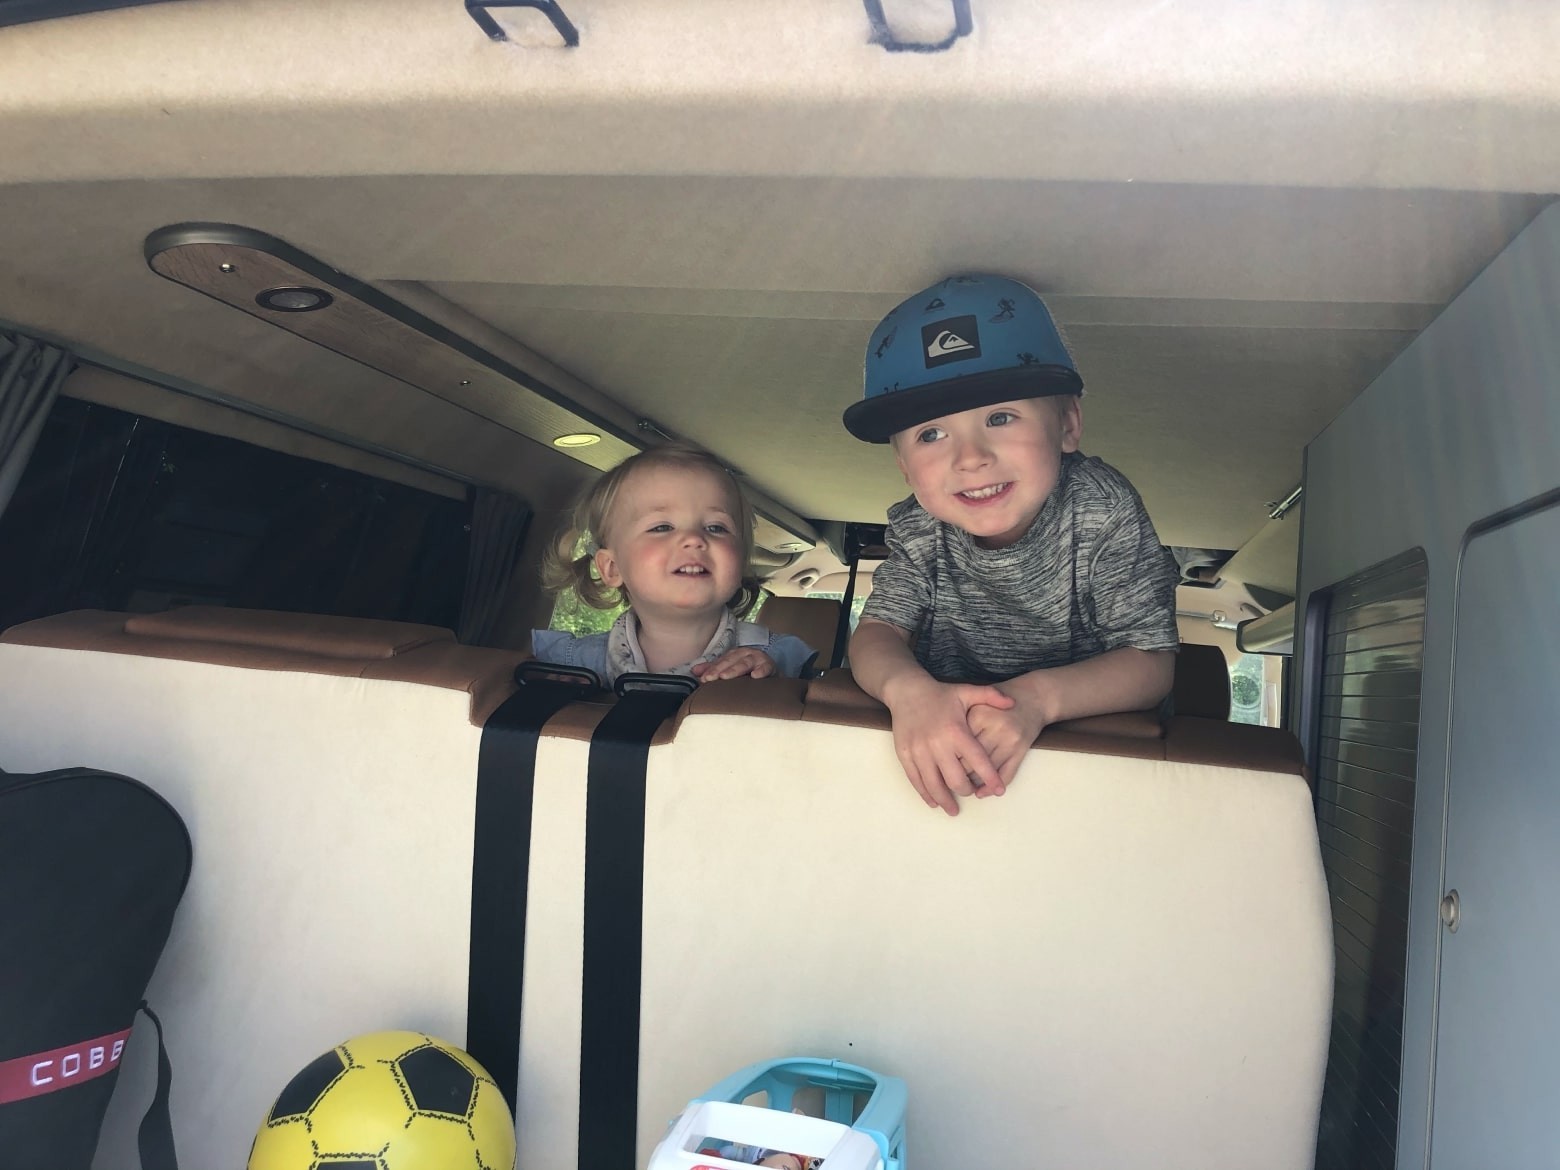 The picture above is of the children enjoying their time in the campervan during the shoot!